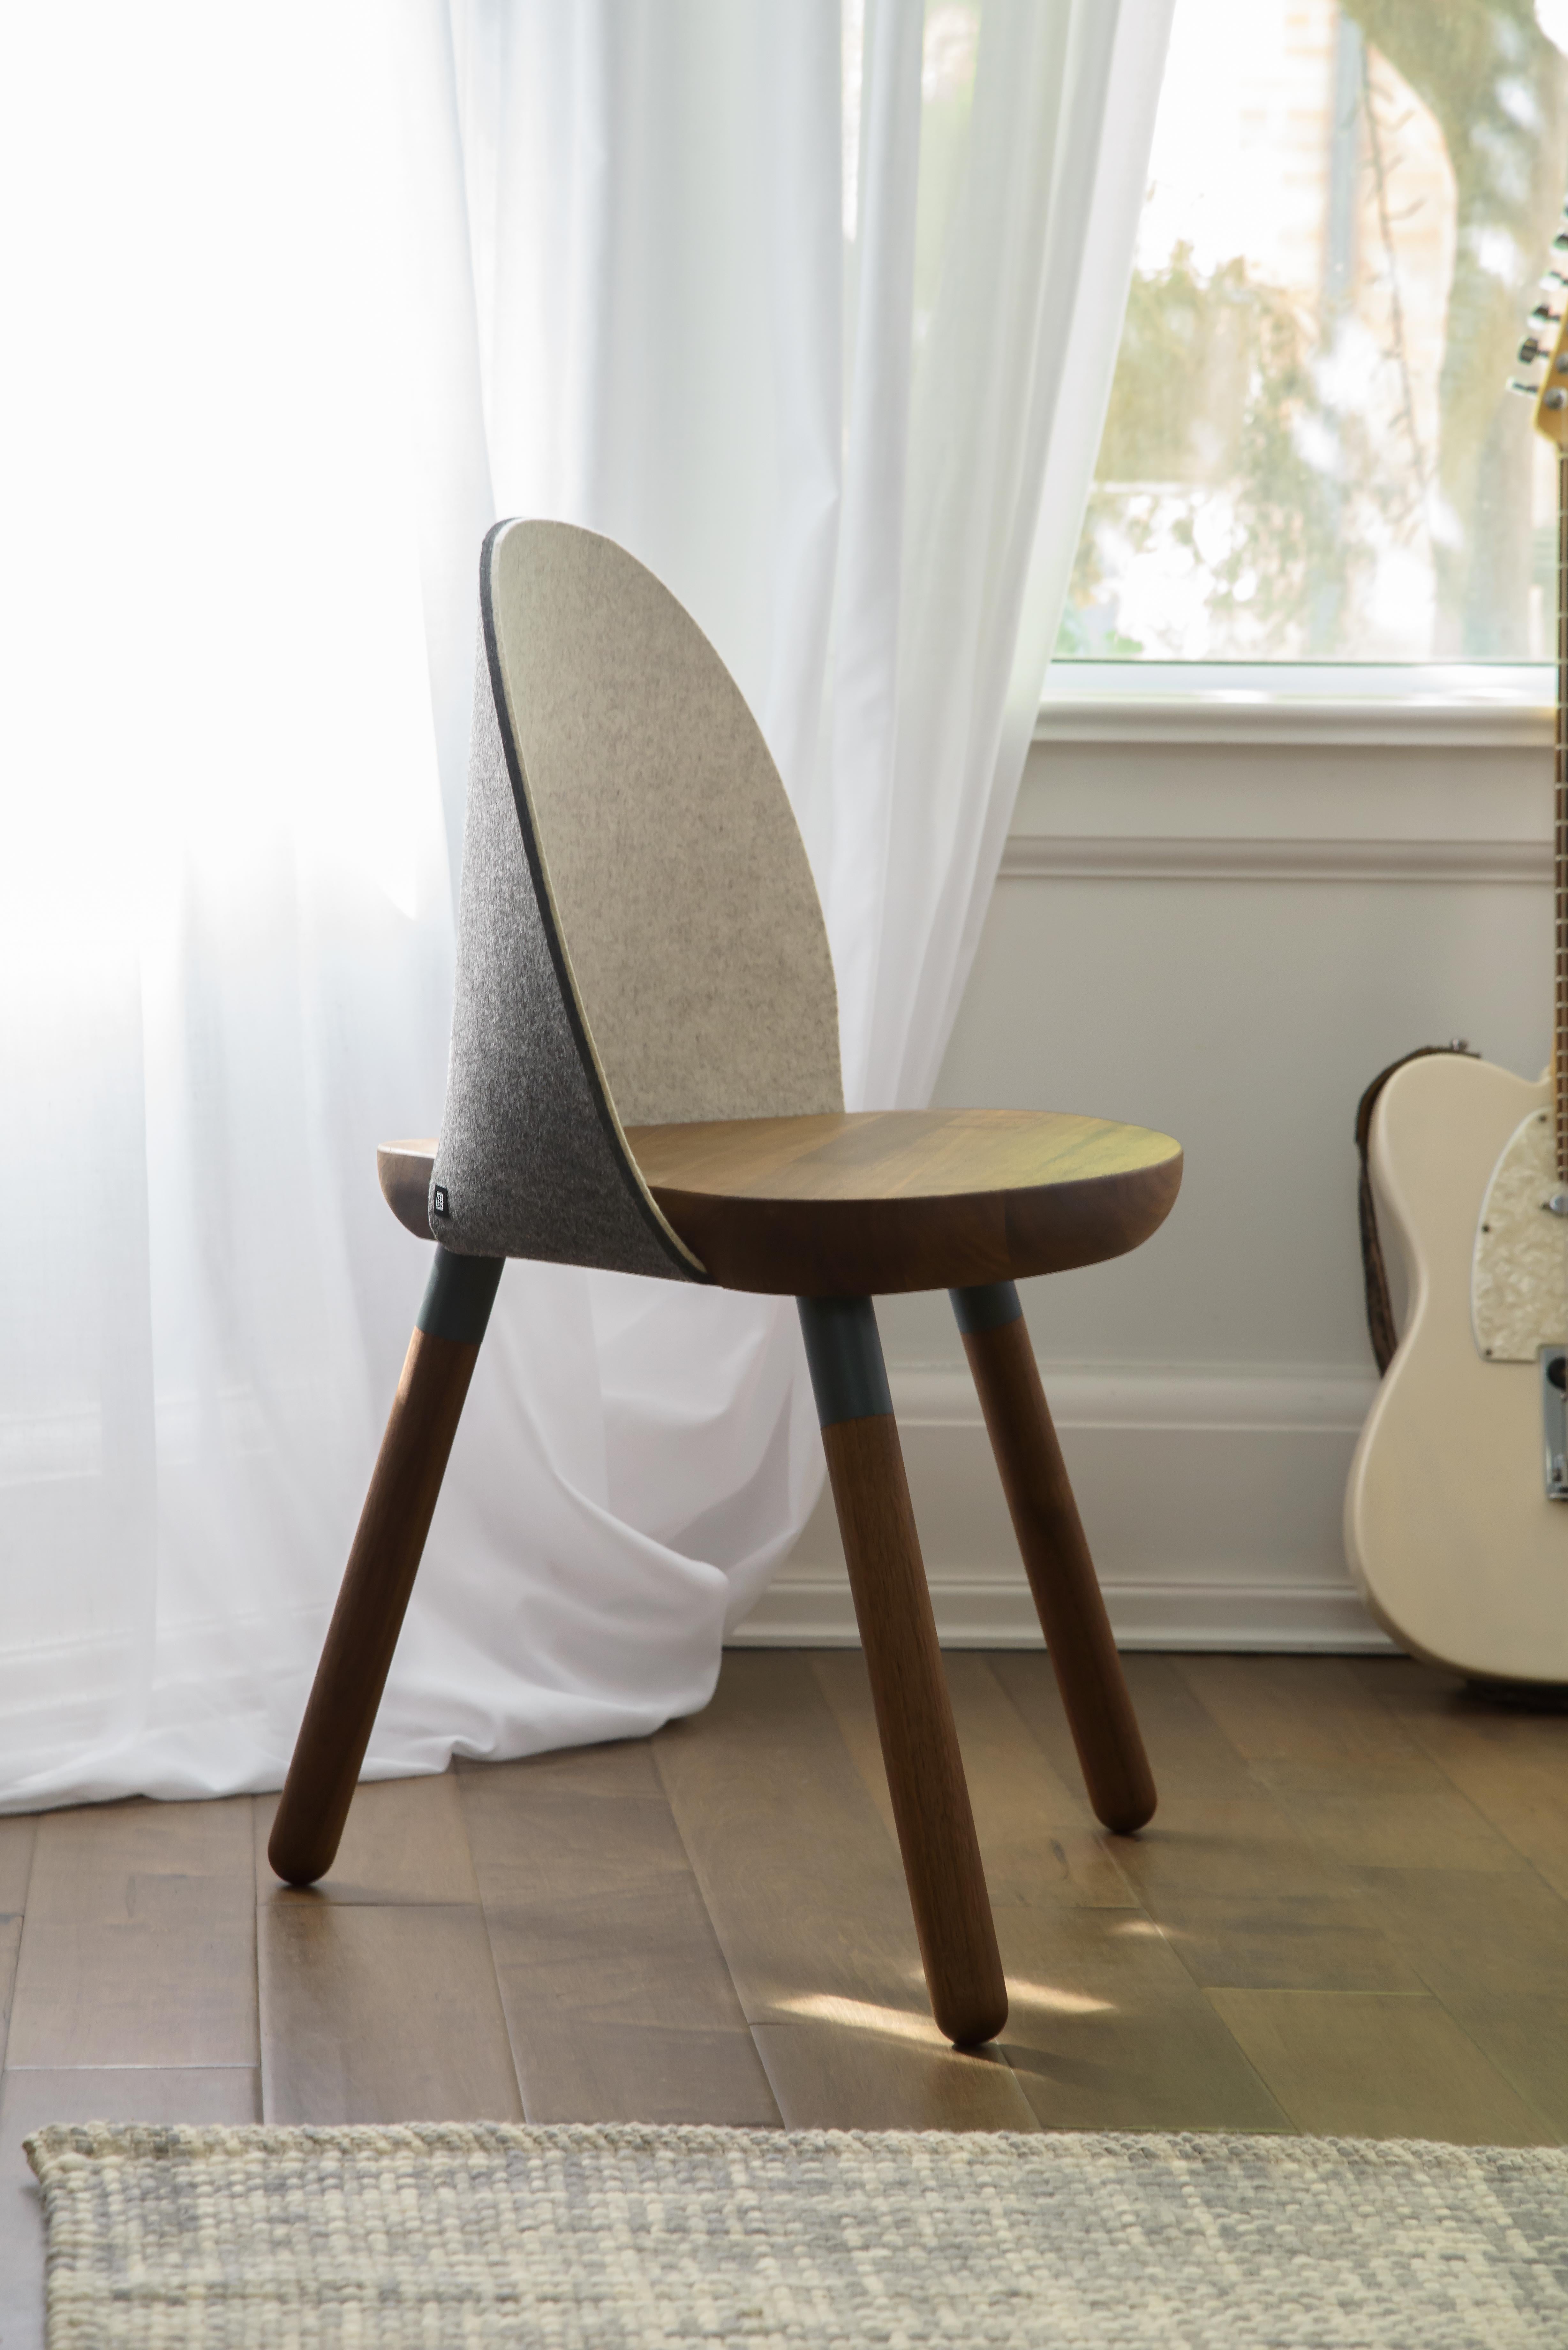 Cinch Chair, Melton Wool, Wood Seat and Eco-Friendly Powder Coated Steel Support (Geölt) im Angebot